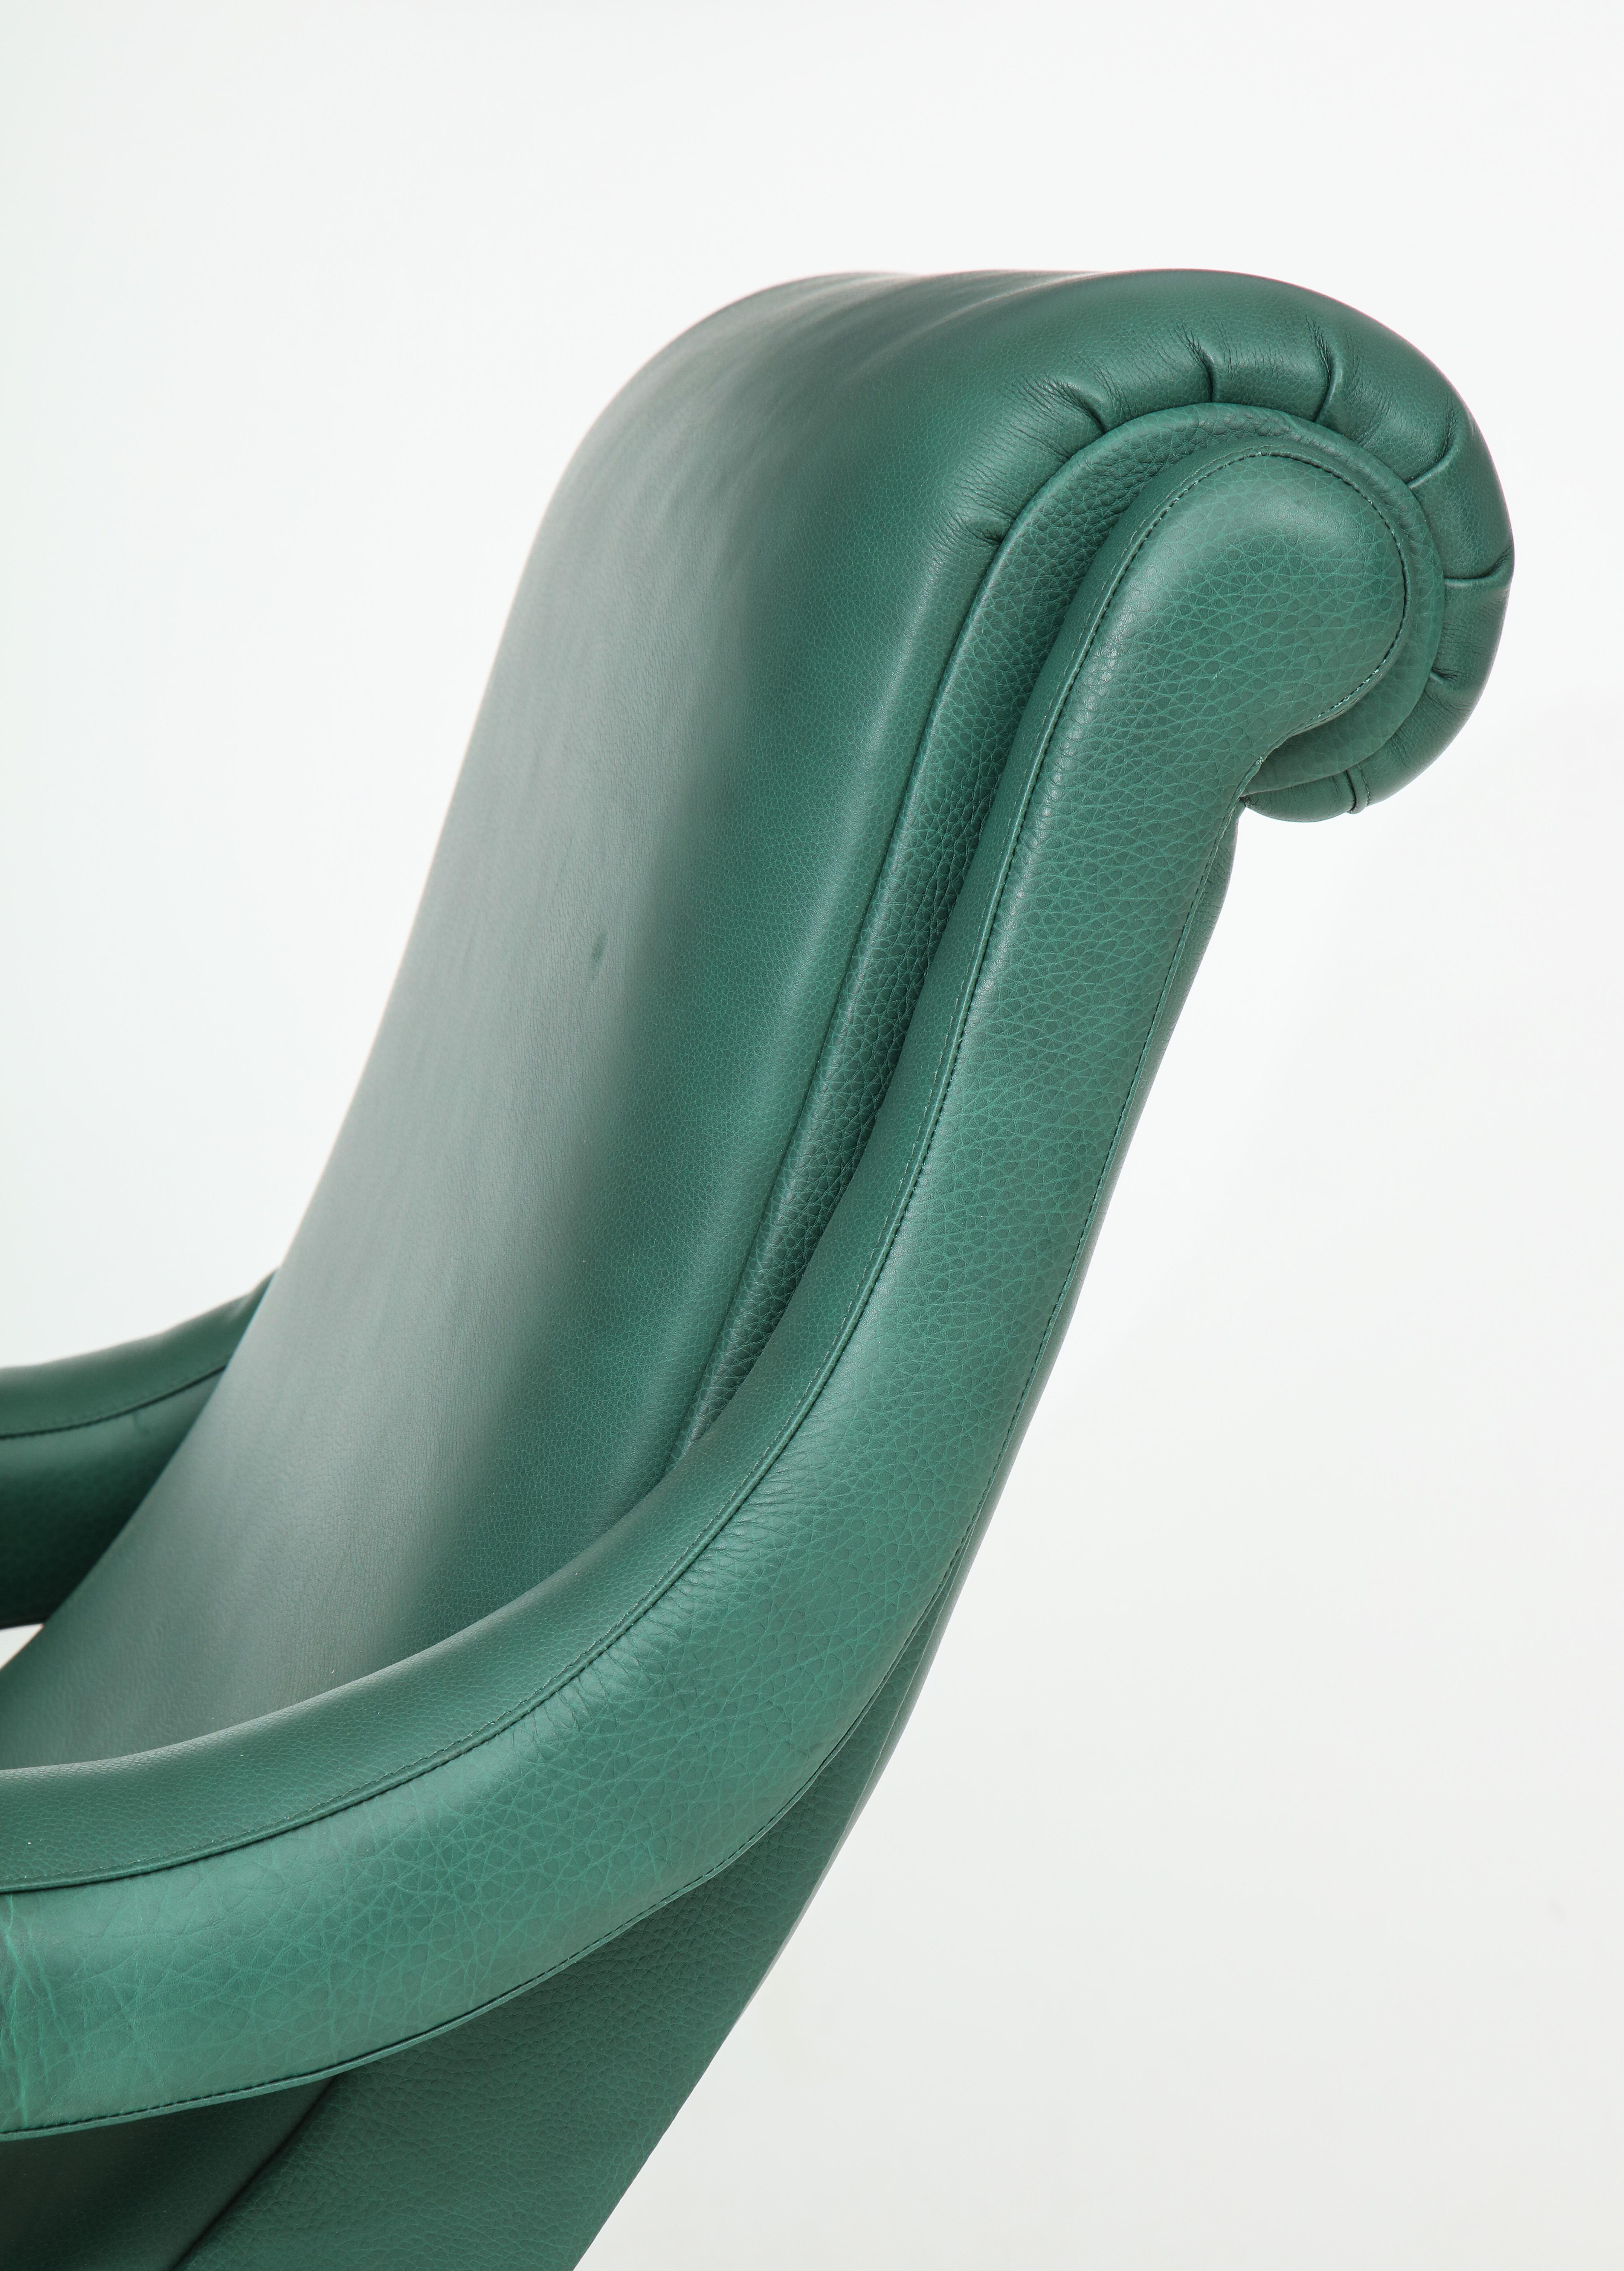 Brass Pair of Lounge Chairs in Gucci Green Leather by Radice for Lenzi, c. 1950, Italy